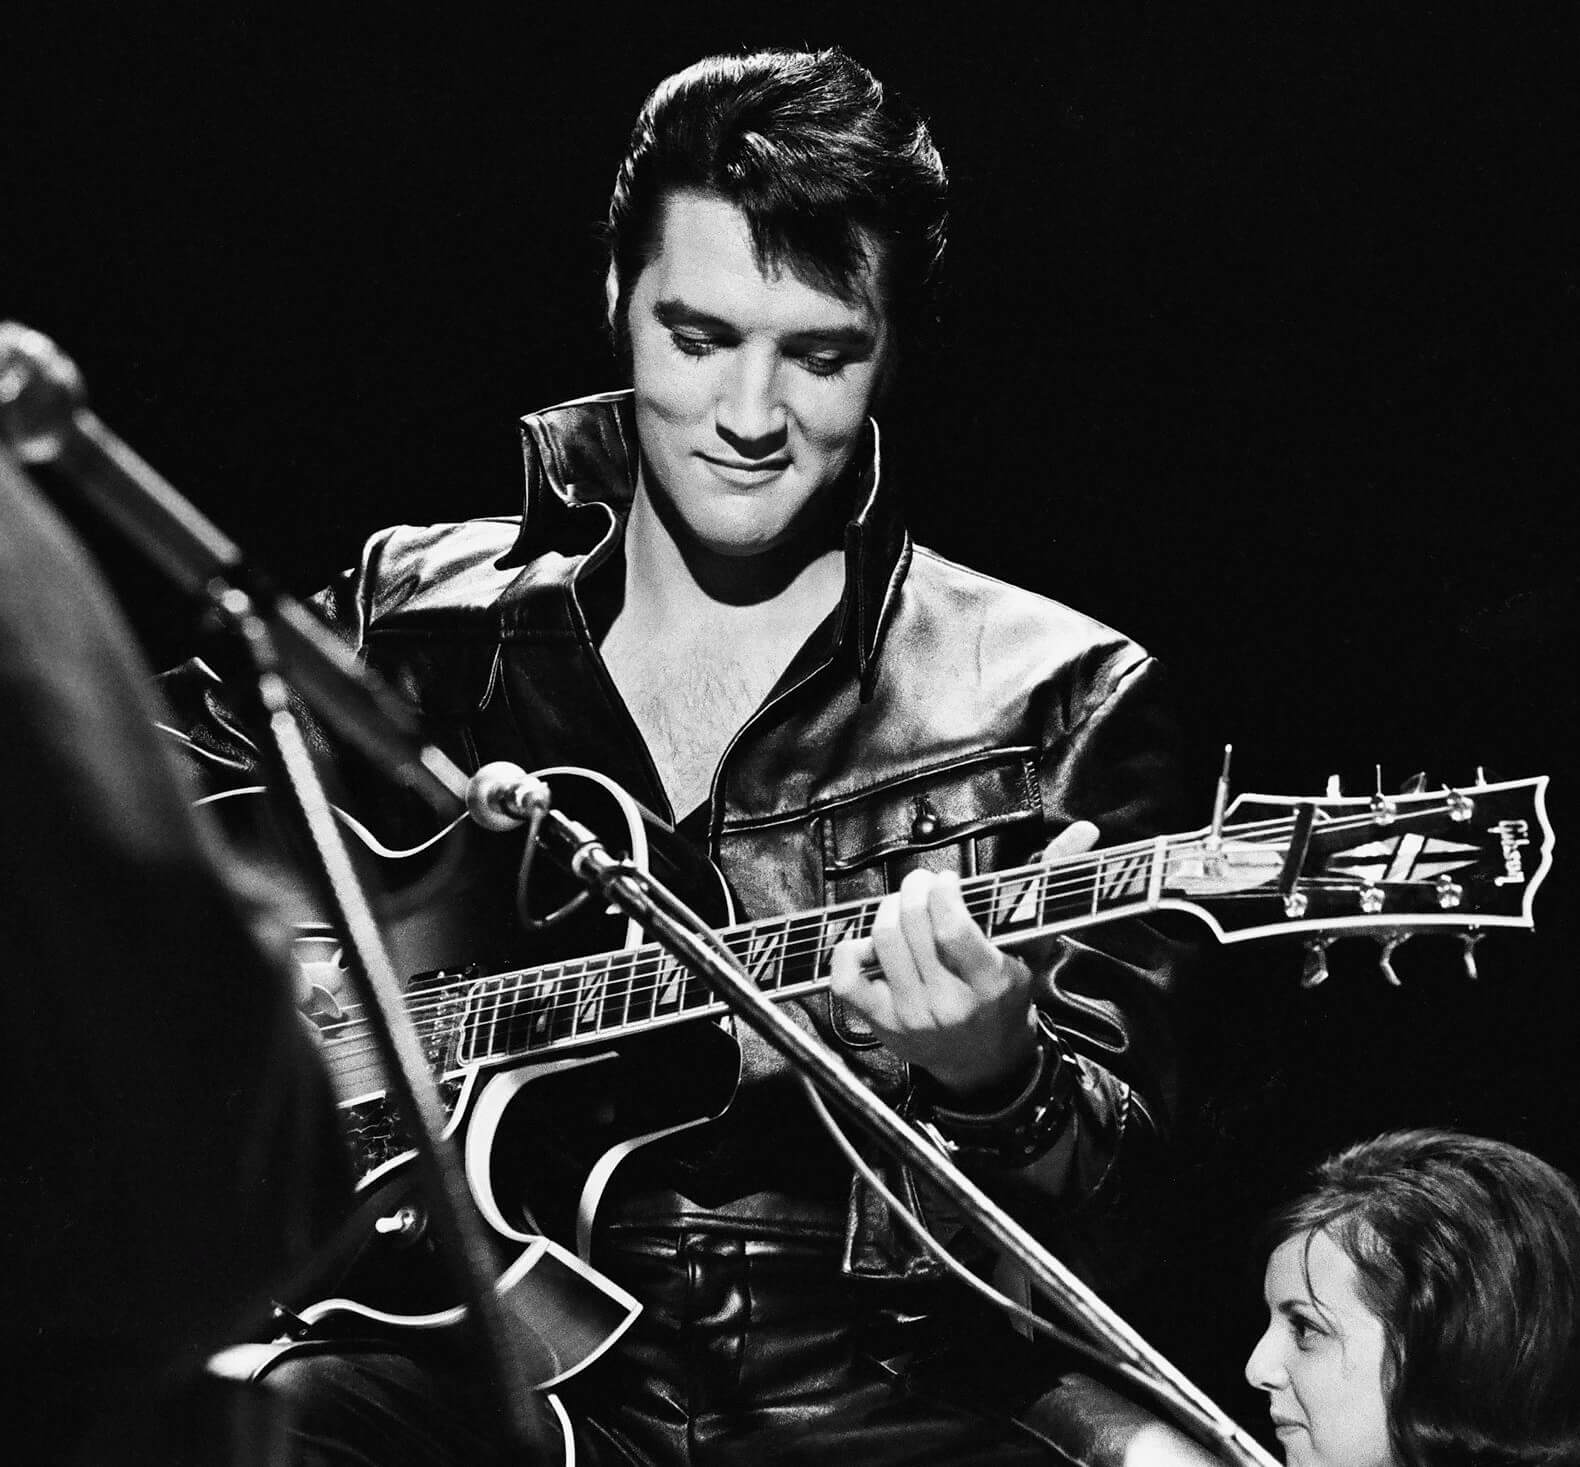 "Trouble" singer Elvis Presley with a guitar